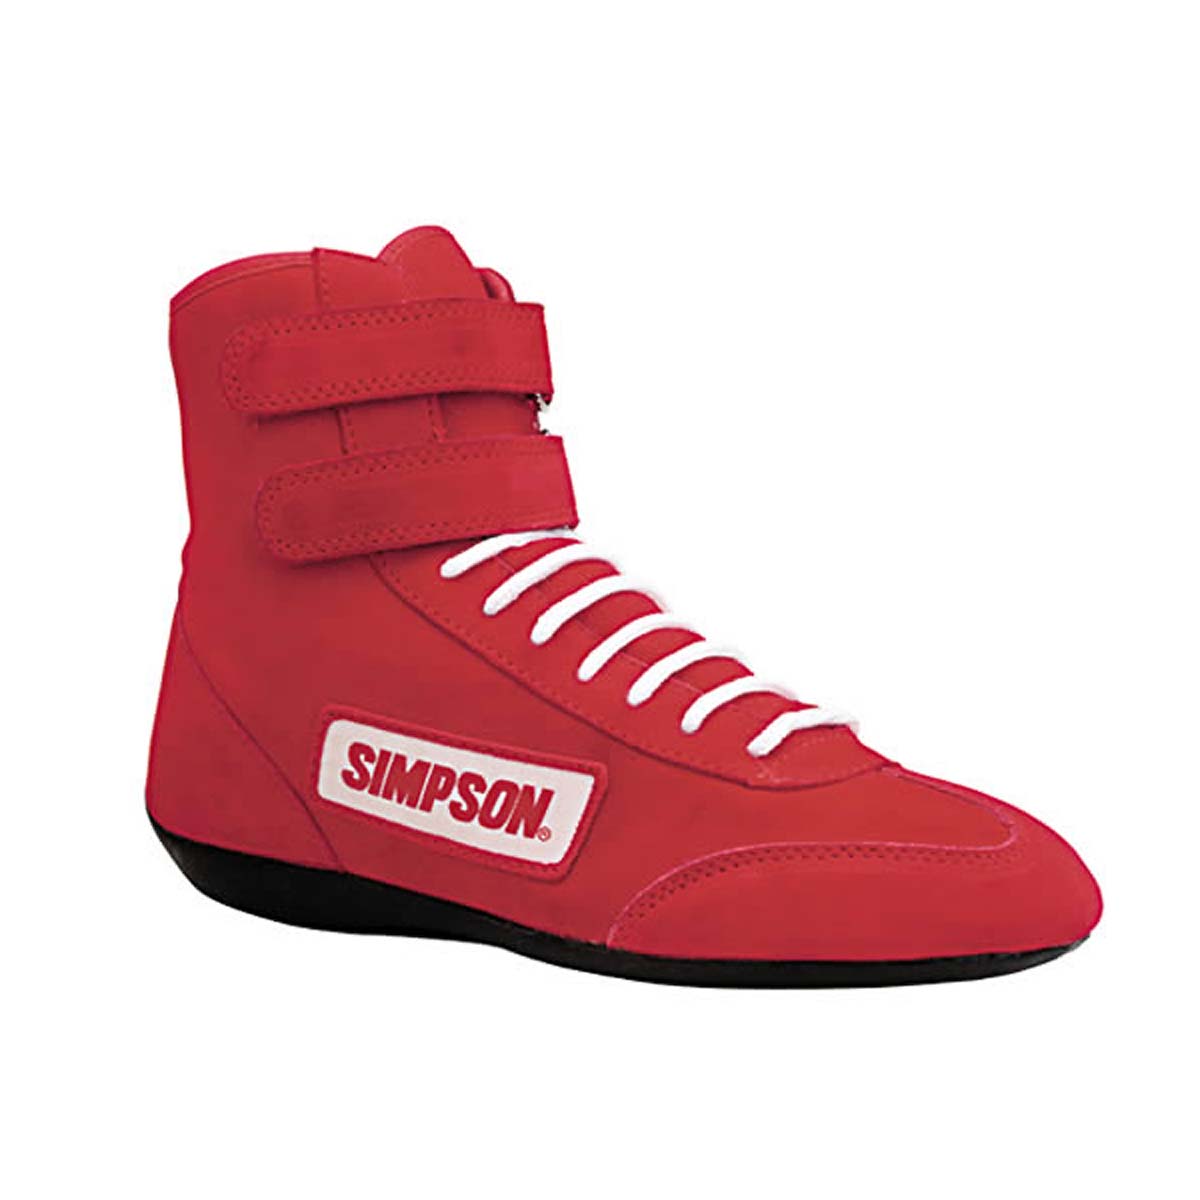 Simpson High Top Nomex Driving Shoes